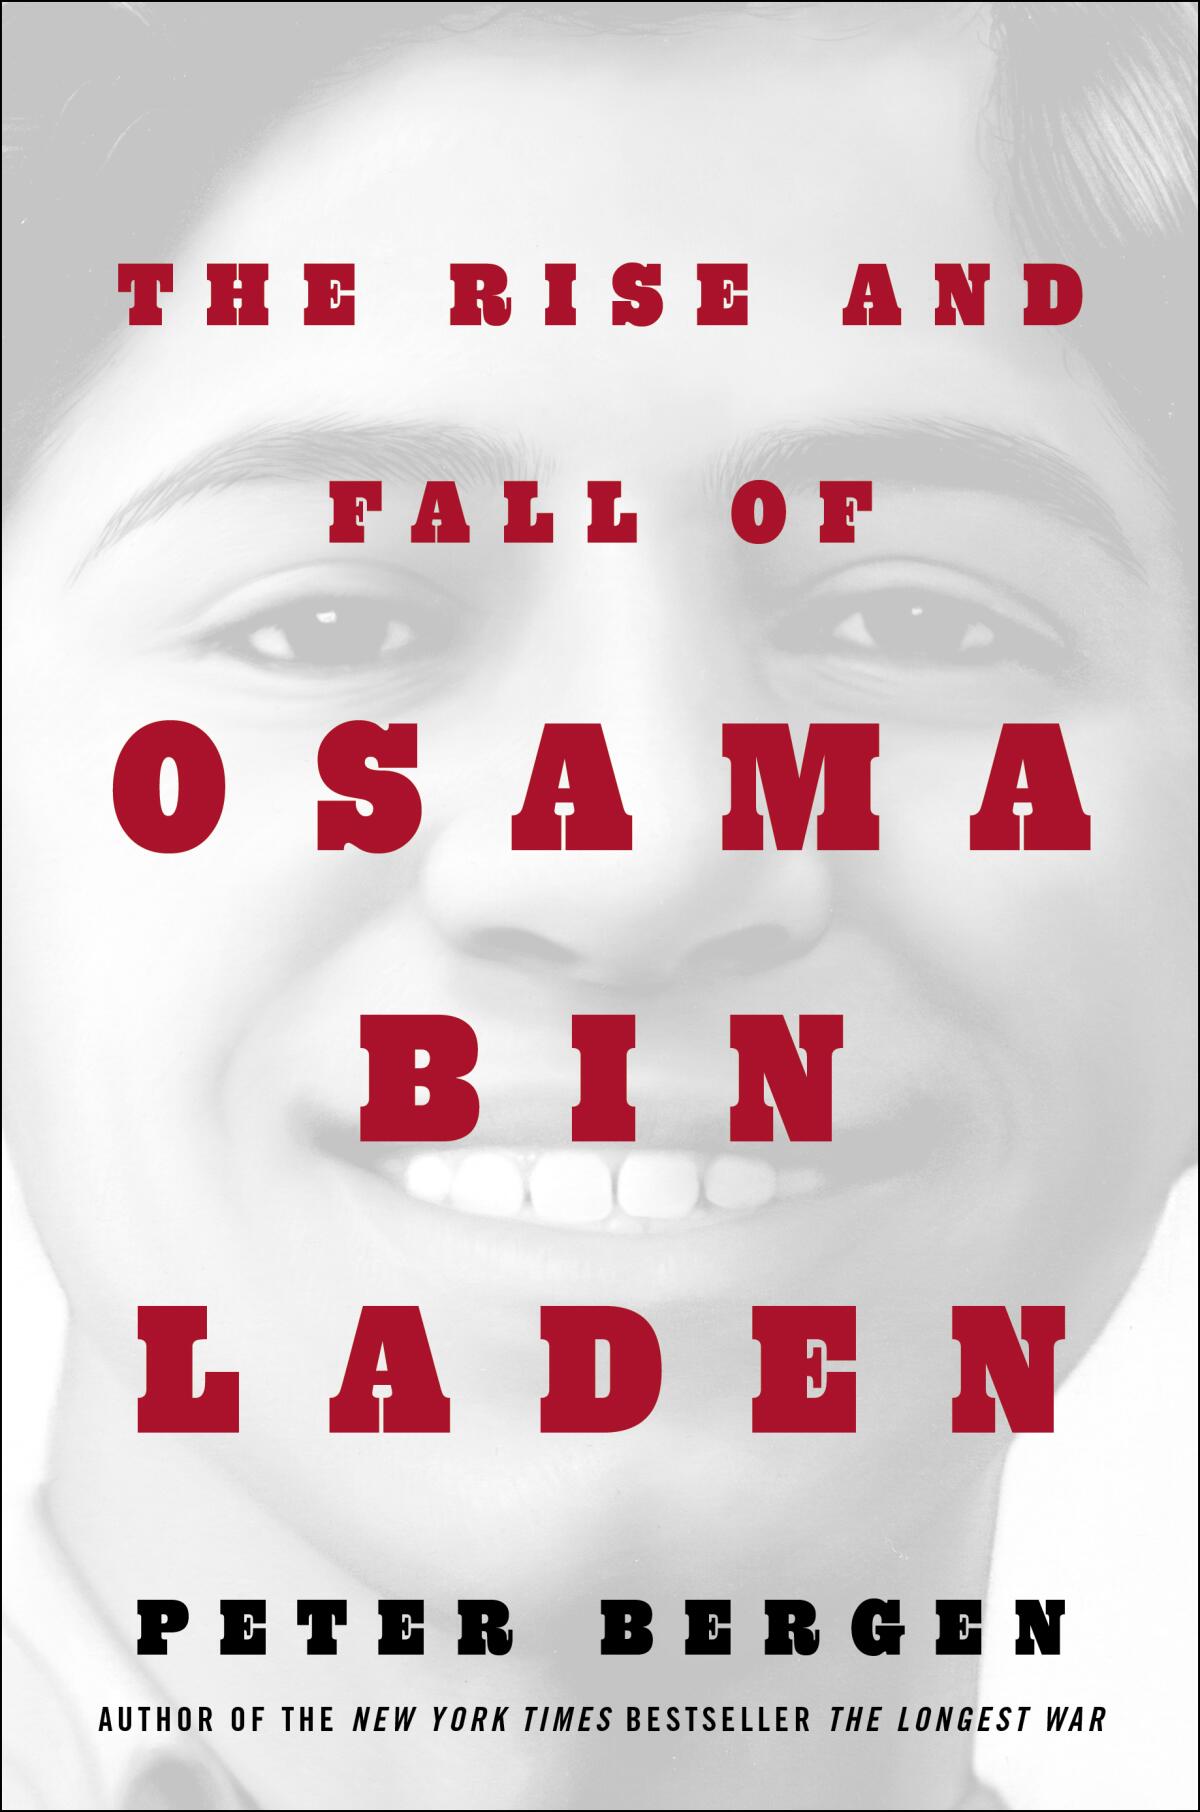 "The Rise and Fall of Osama Bin Laden," by Peter Bergen